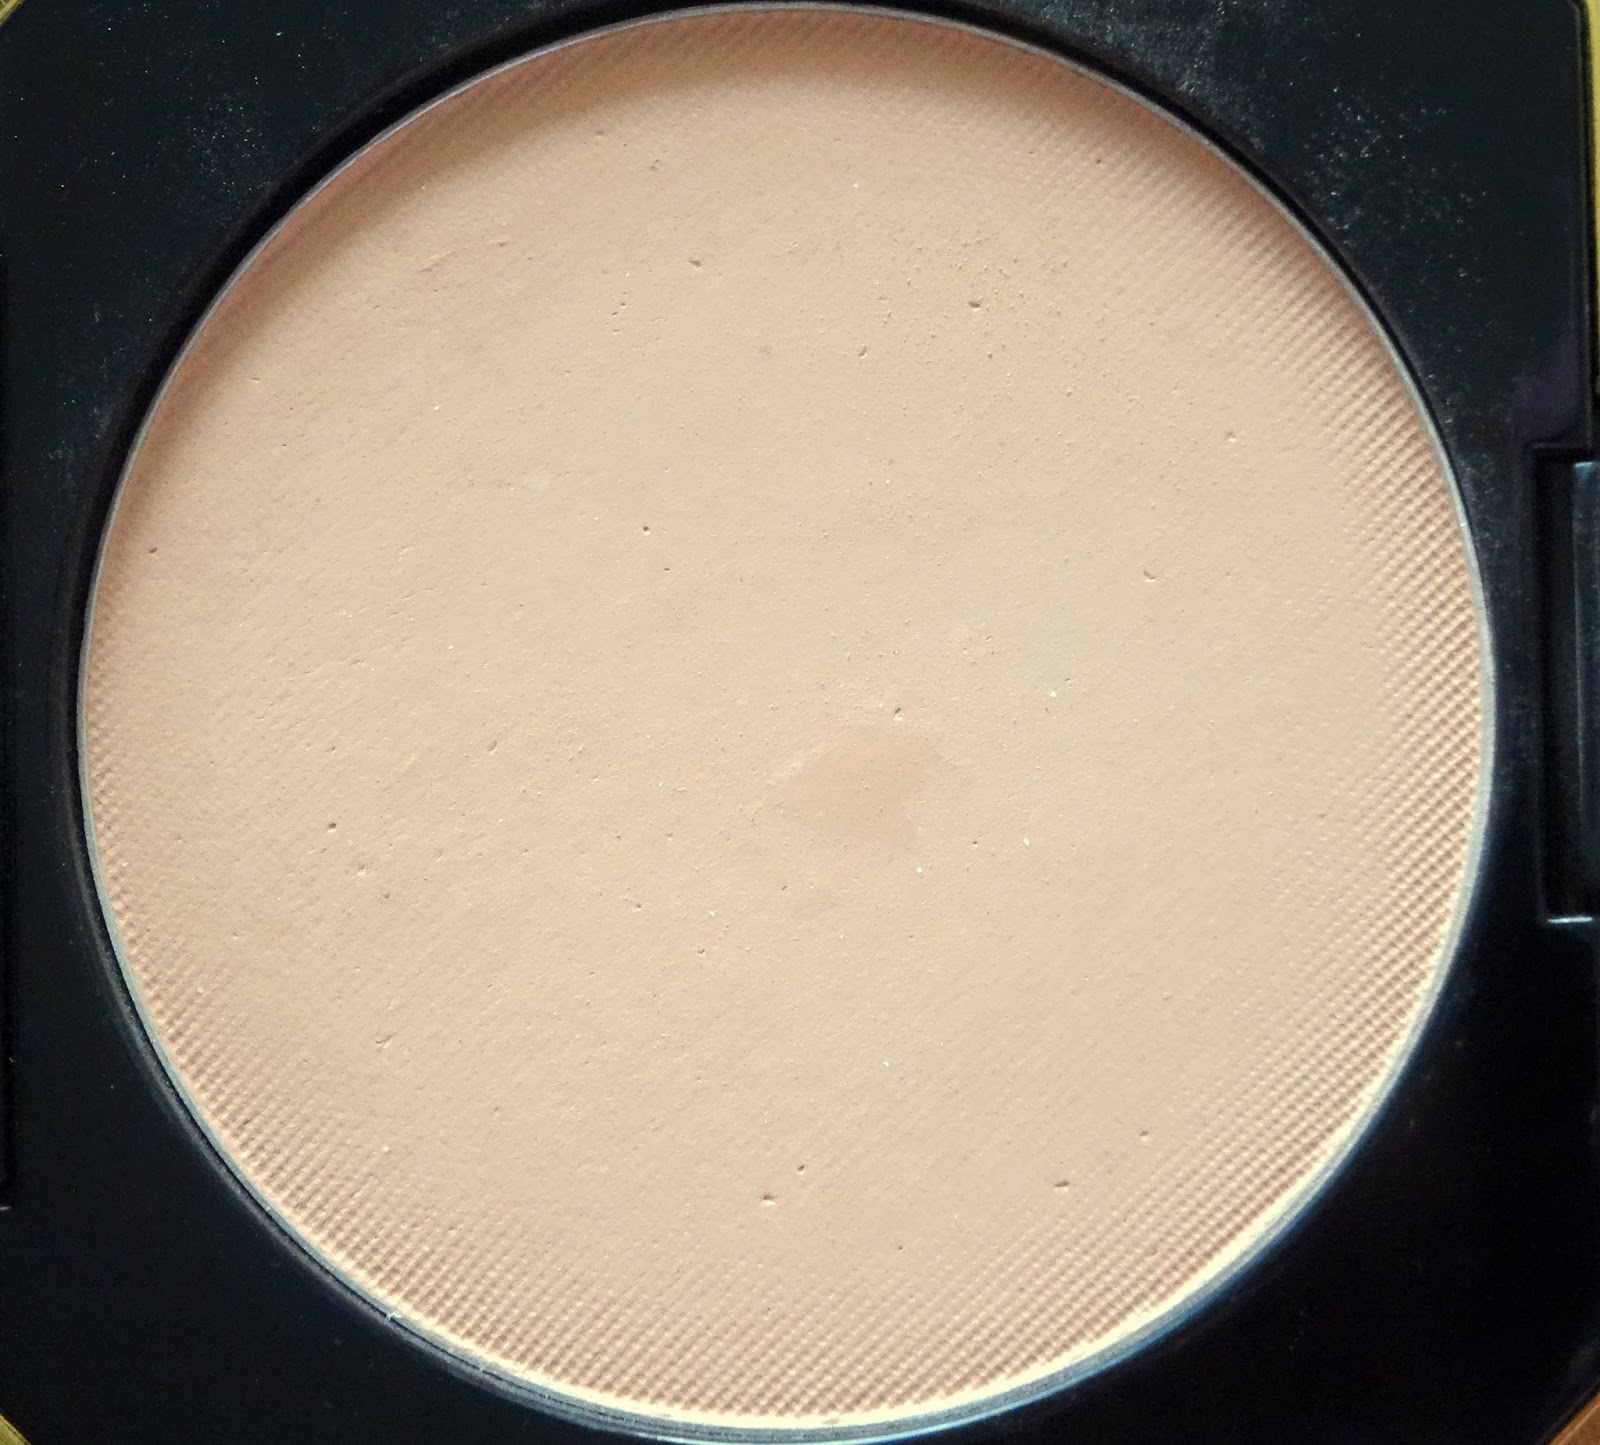 Revlon Touch and Glow Moisturizing Powder Compact in Ivory Matte